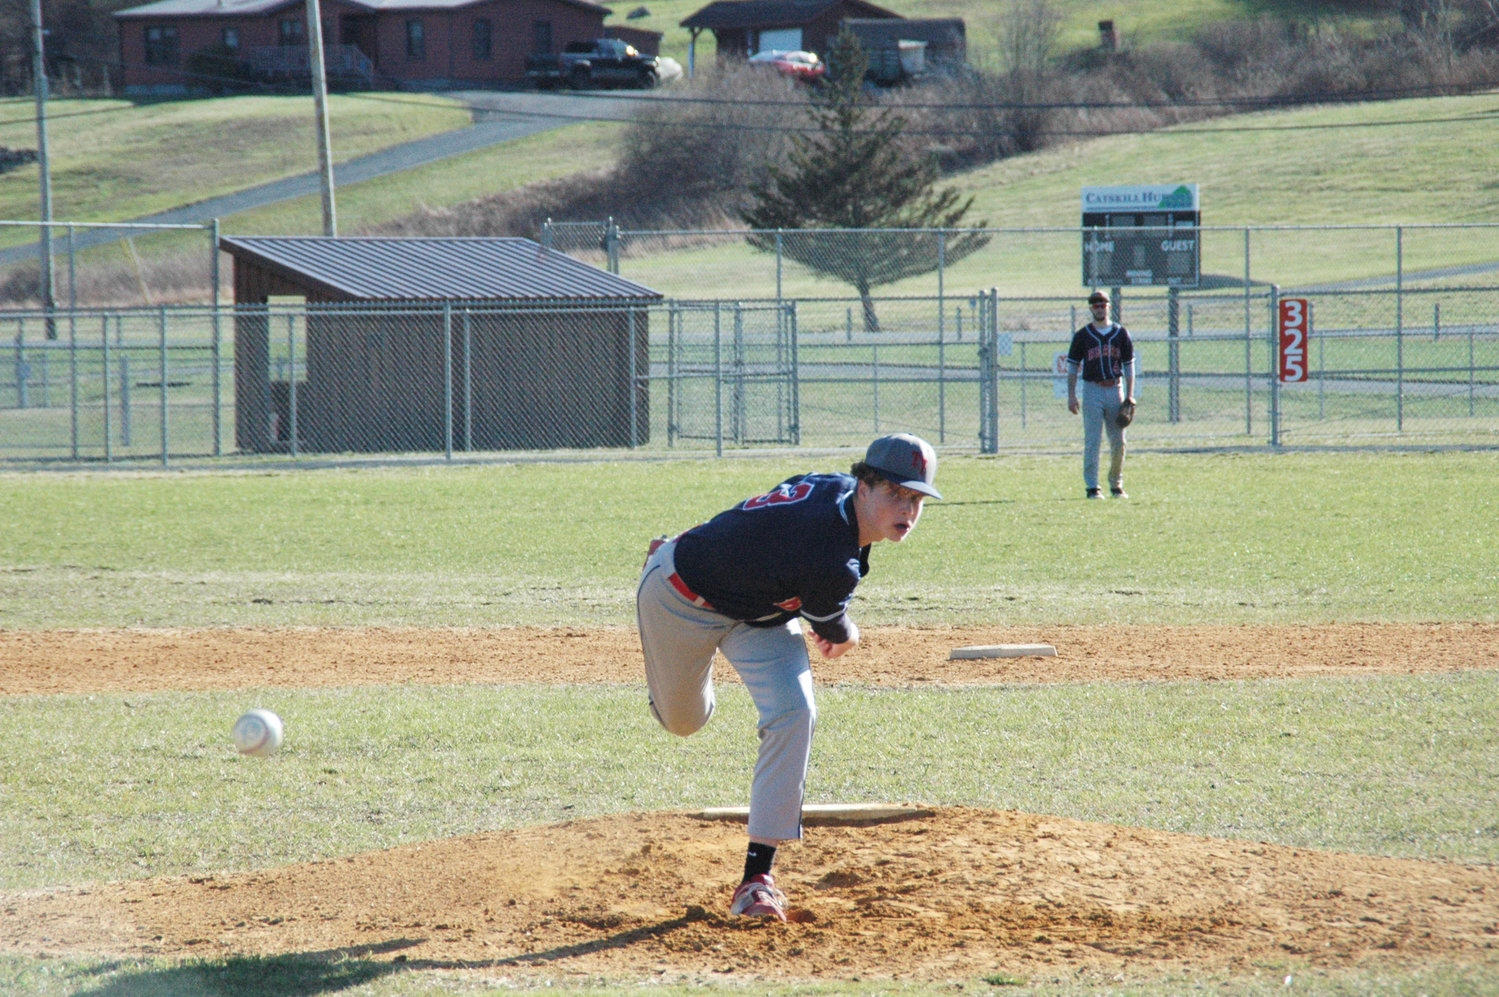 Have a day! Andrew Cox started for the Bears, striking out 11 Yellowjackets in 4.2 innings. Cox gave up two hits and one earned run in the loss to Eldred.